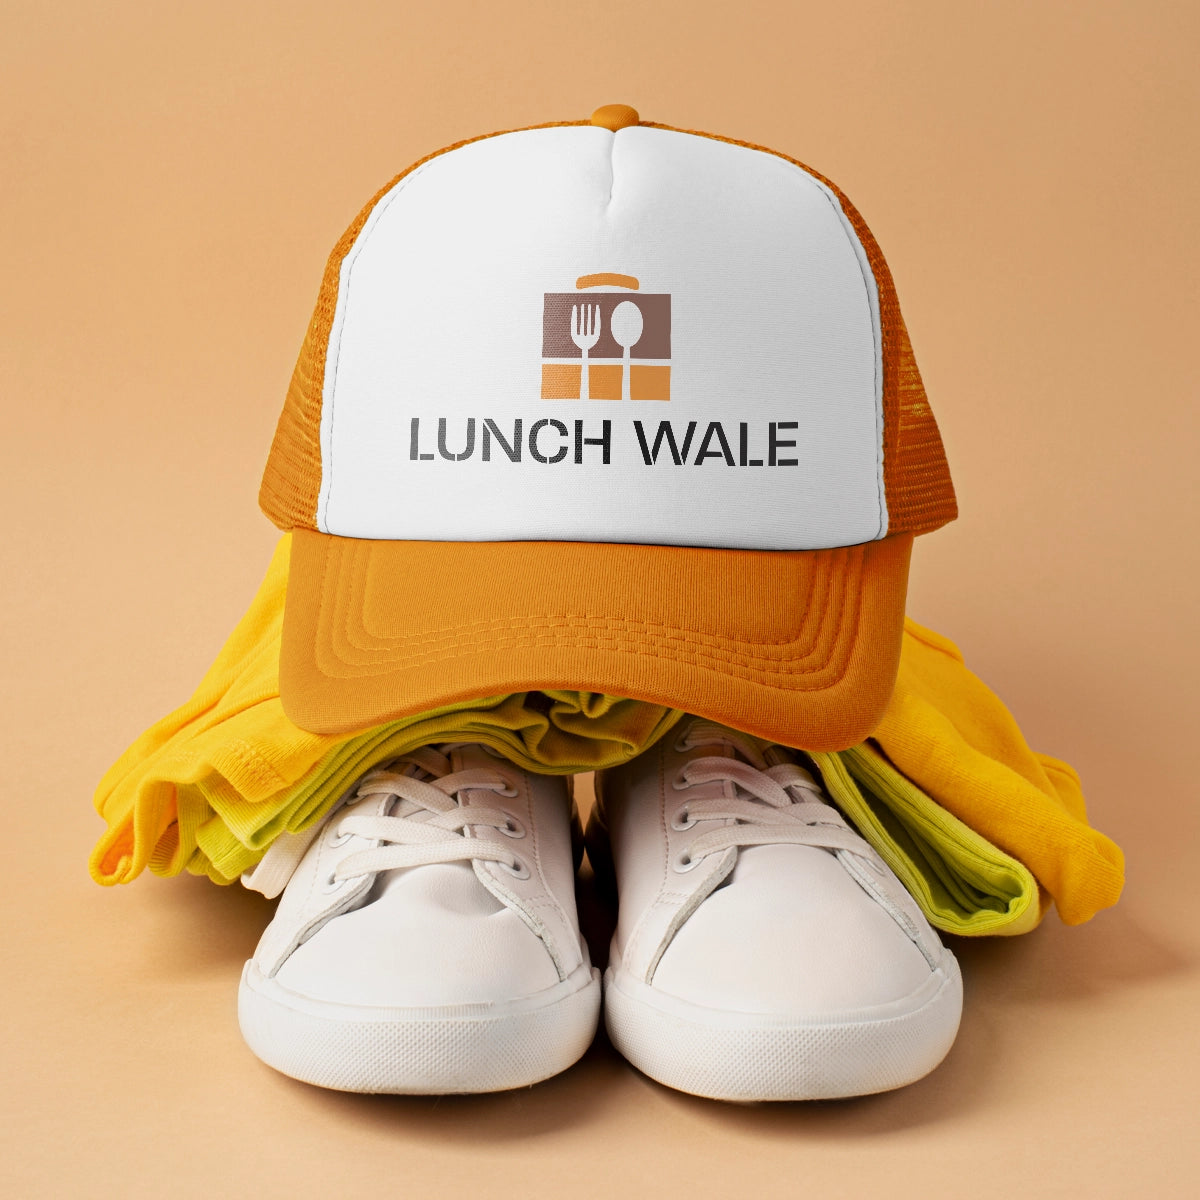 LunchWale.com